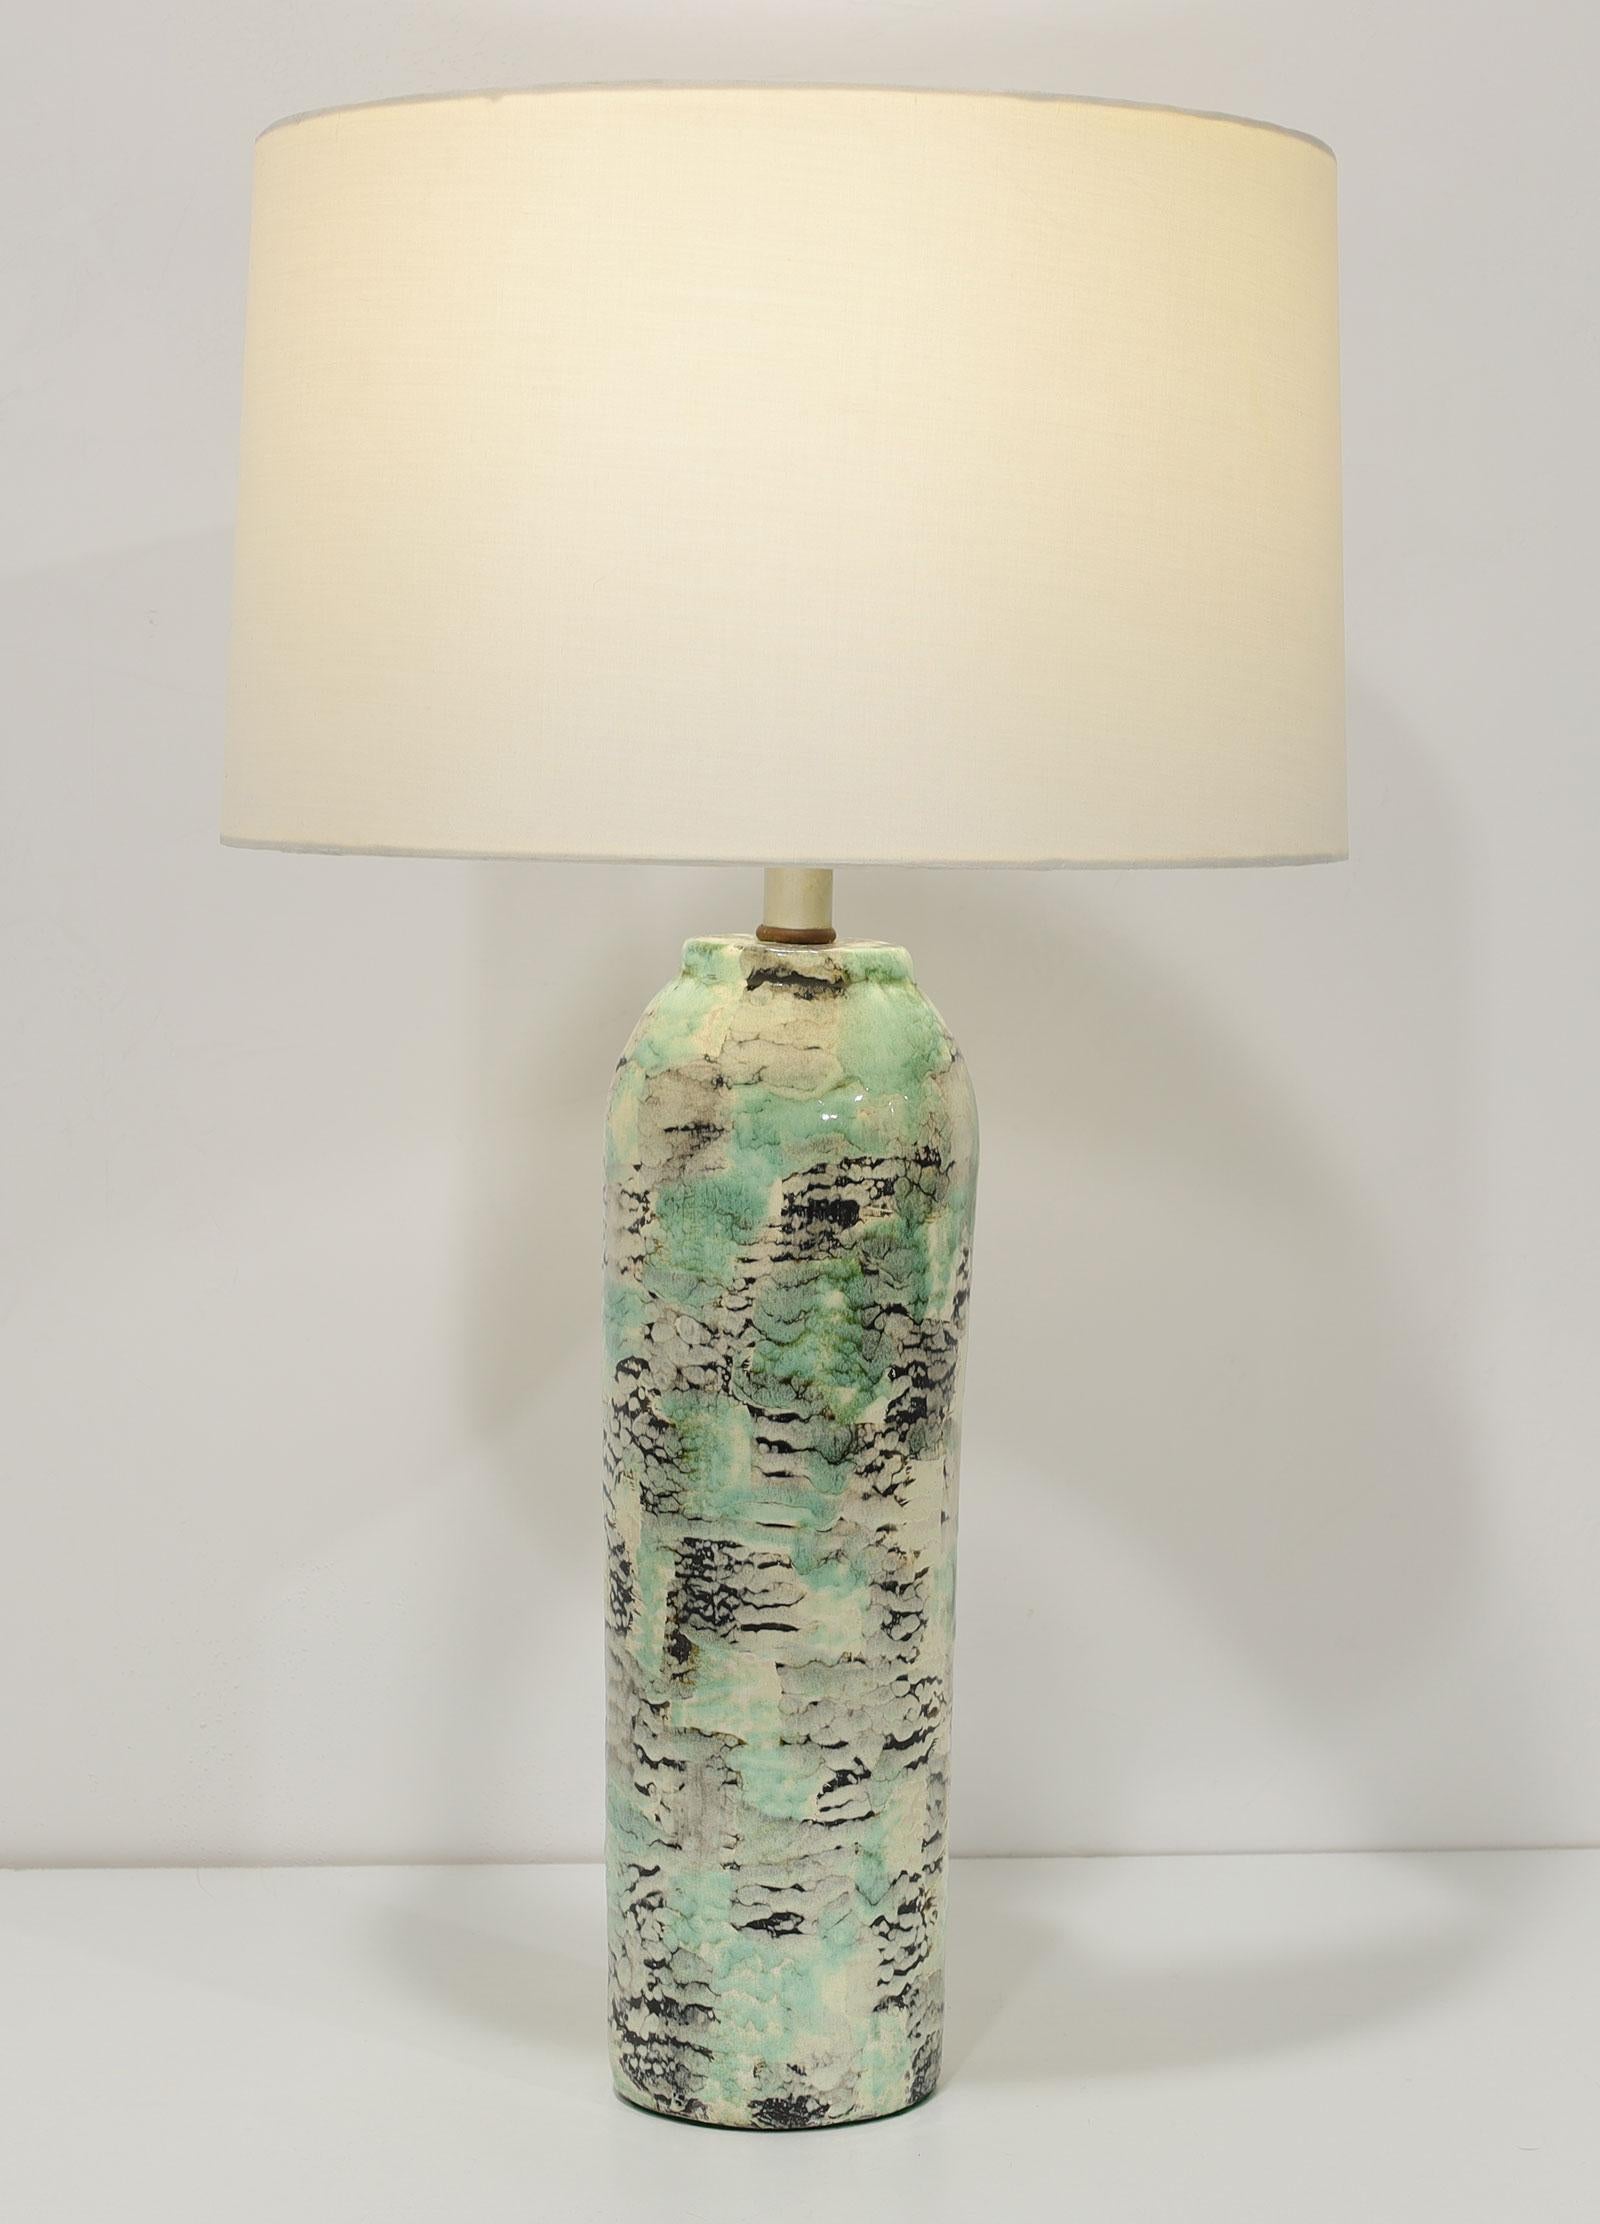 Kelby Ceramic Table Lamp in Black, Green and Off-White Abstract Pattern In Good Condition For Sale In Dallas, TX